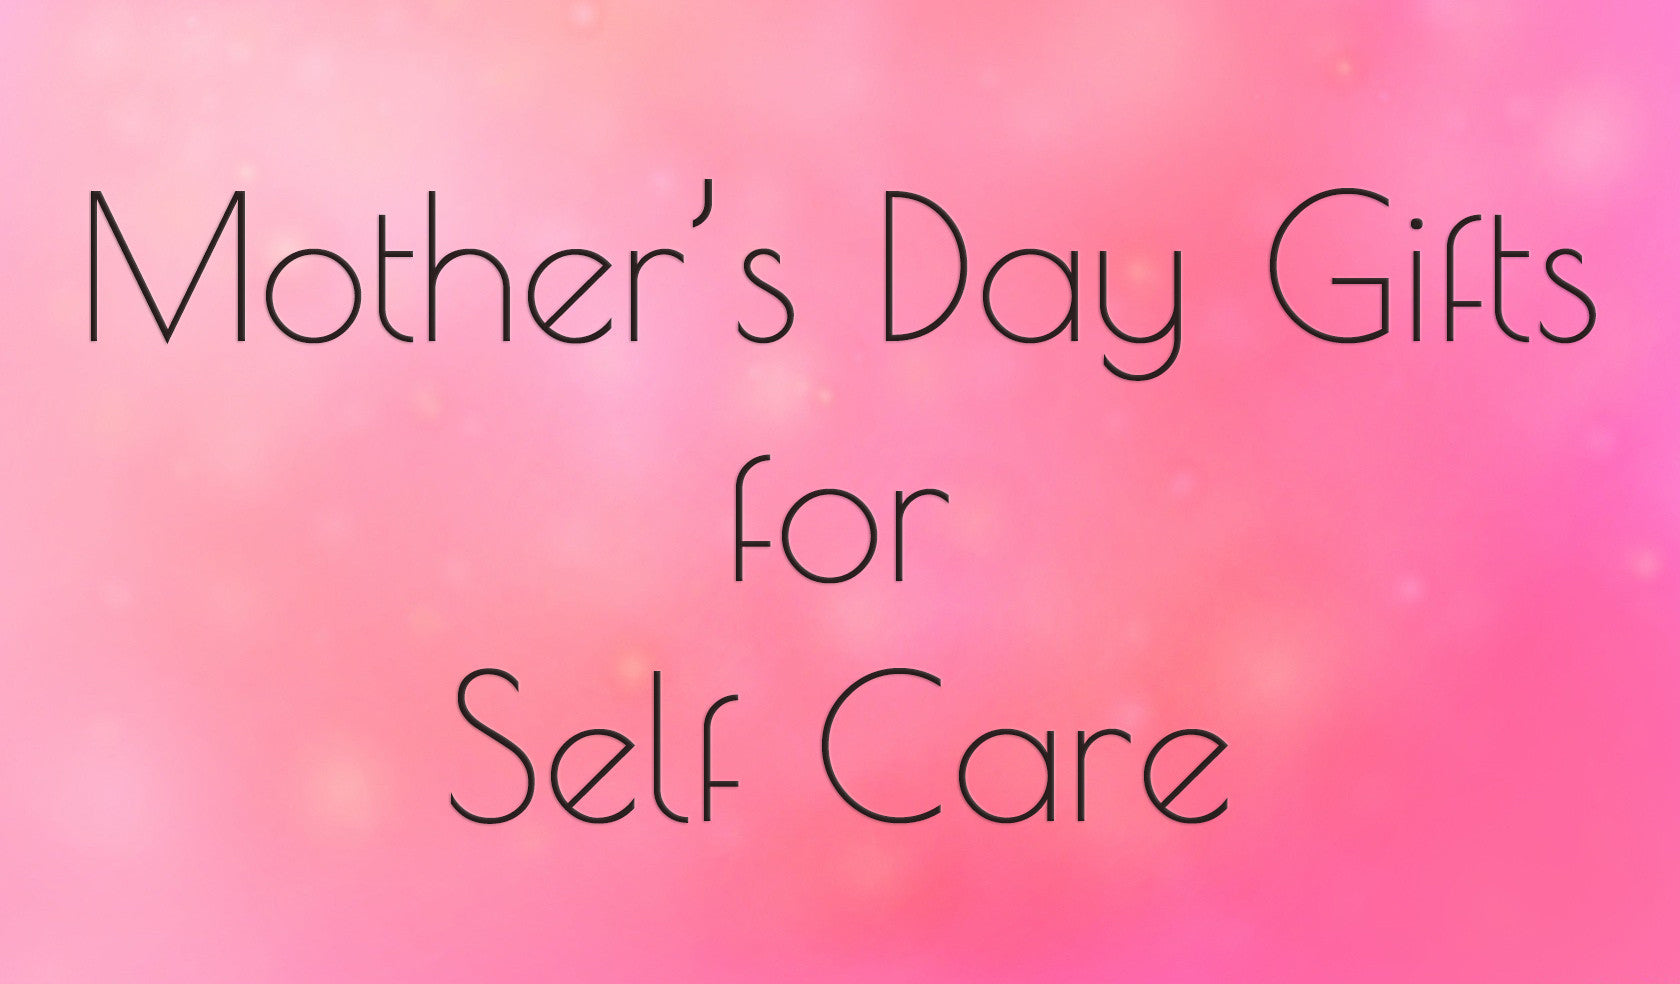 Mother's Day Gifts for Self Care and Wellness